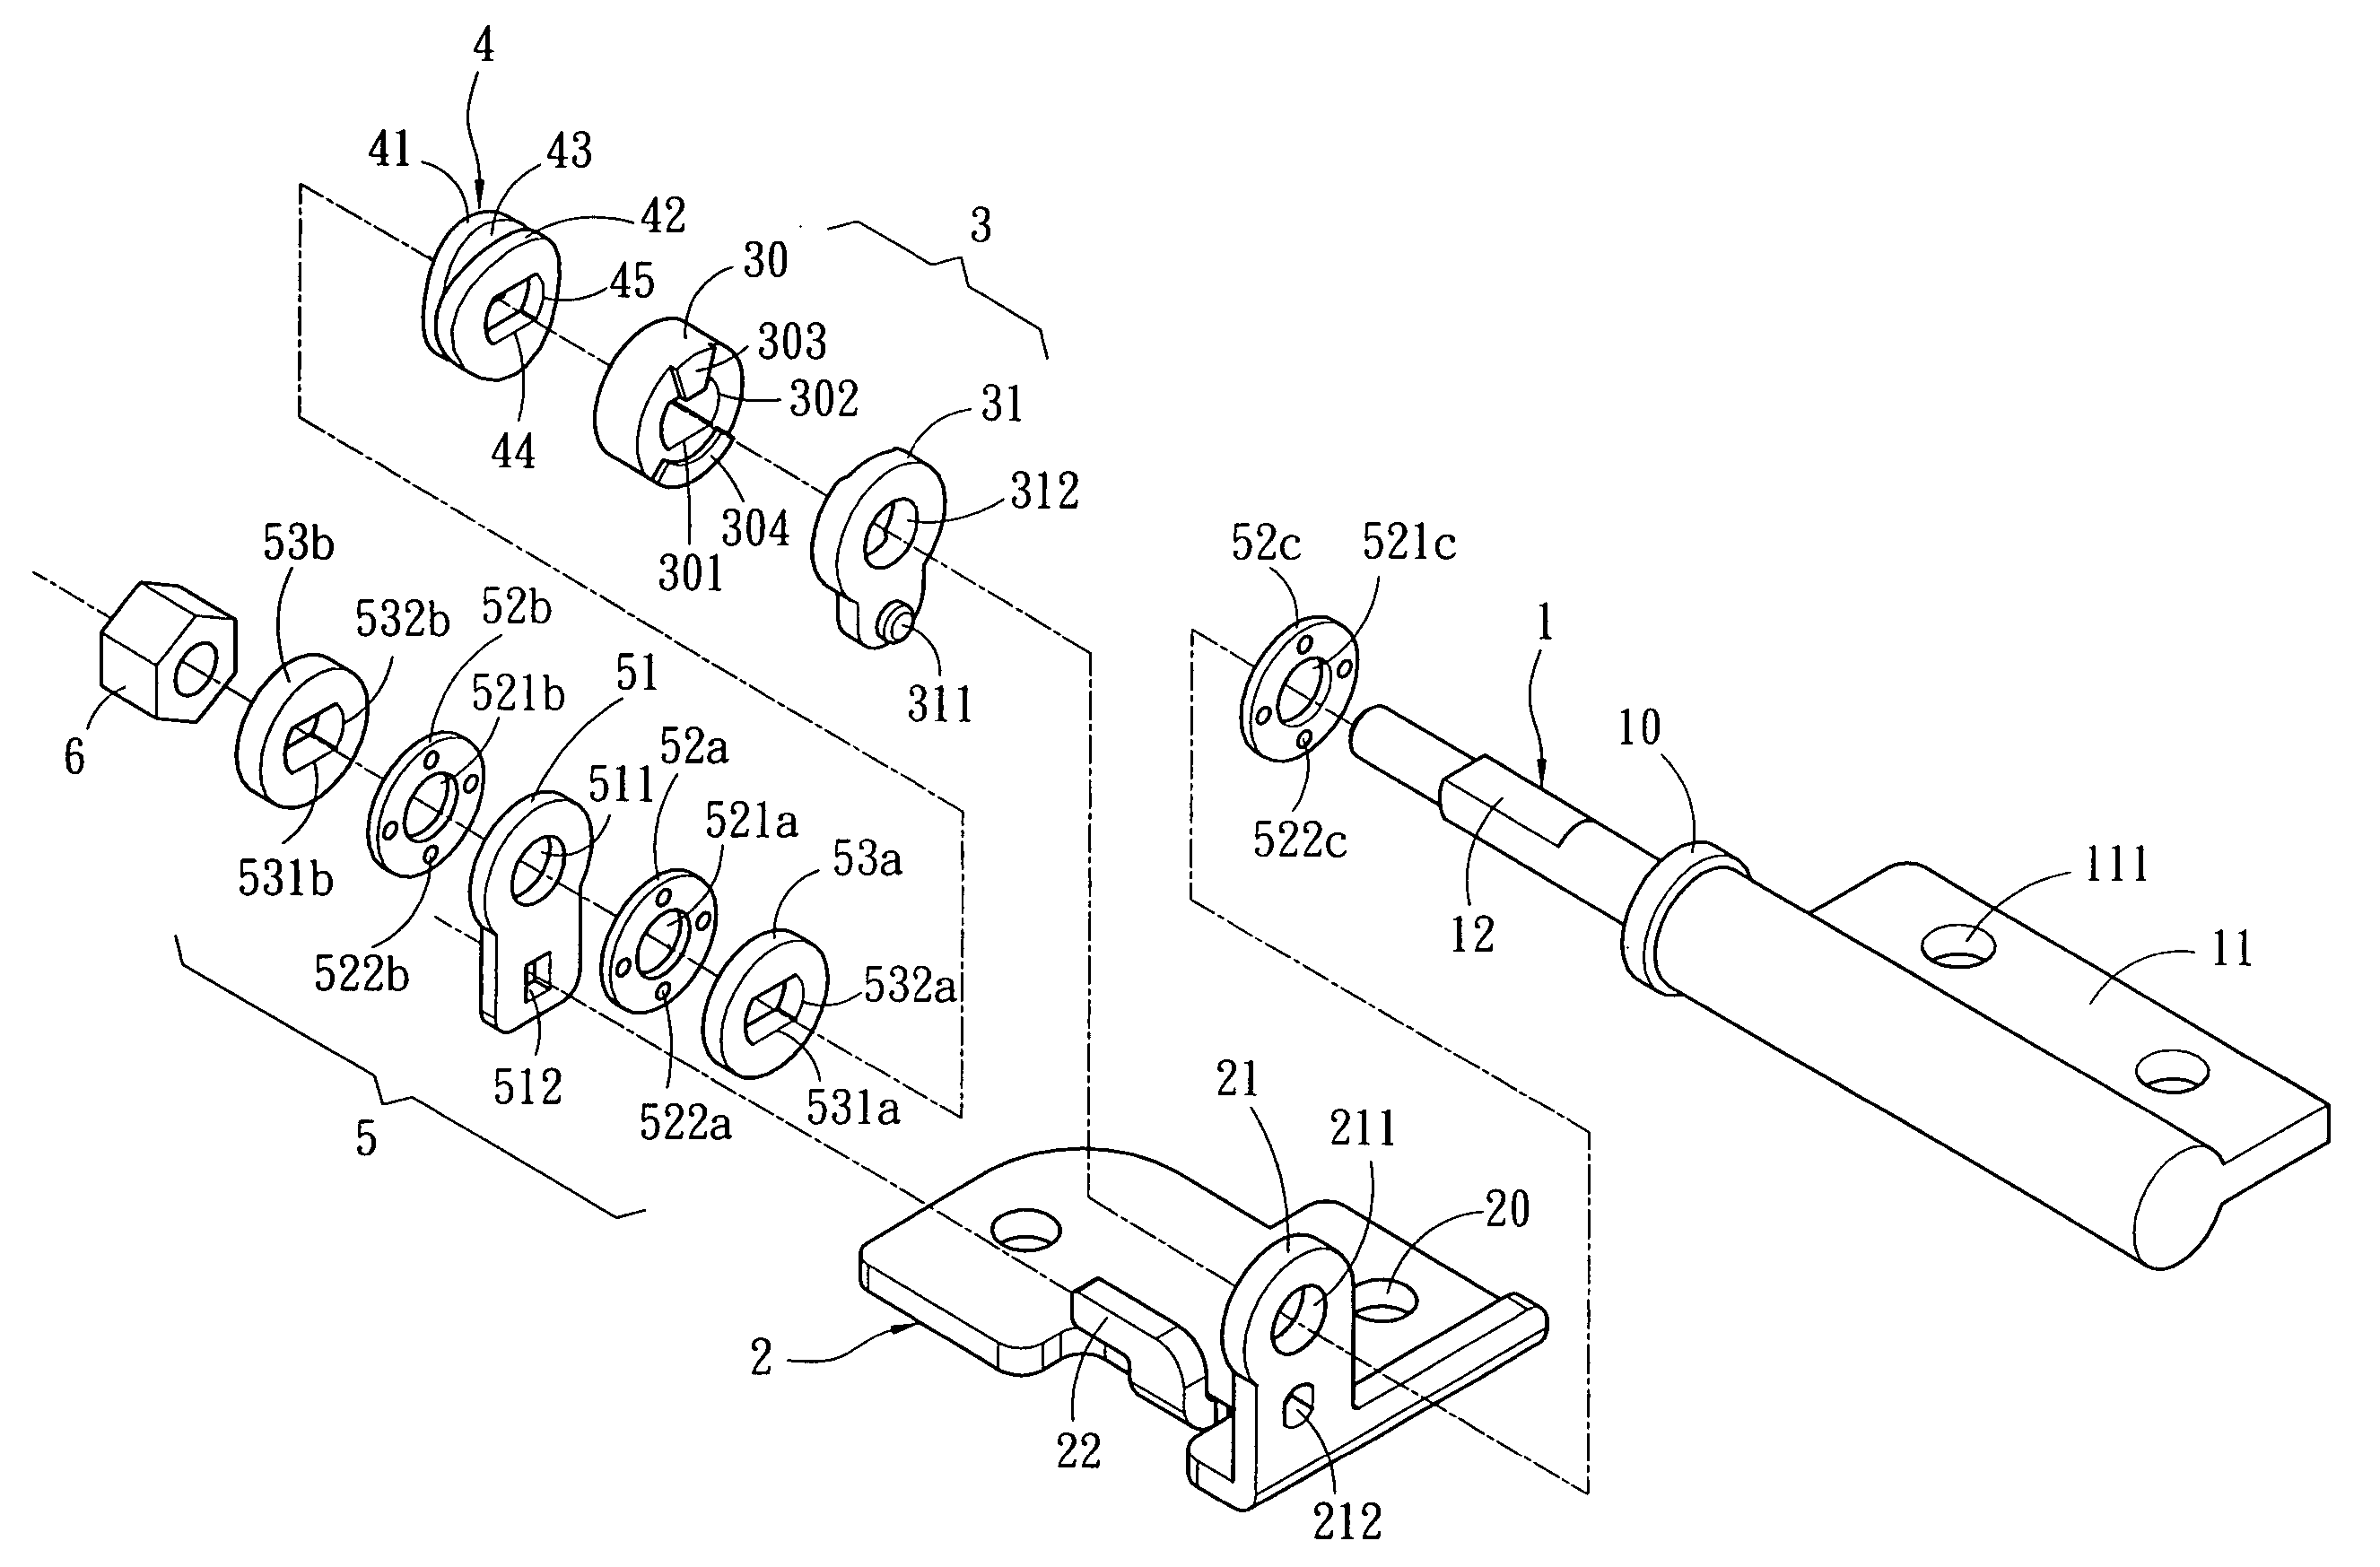 Hinge for anchoring and folding on a small pintle